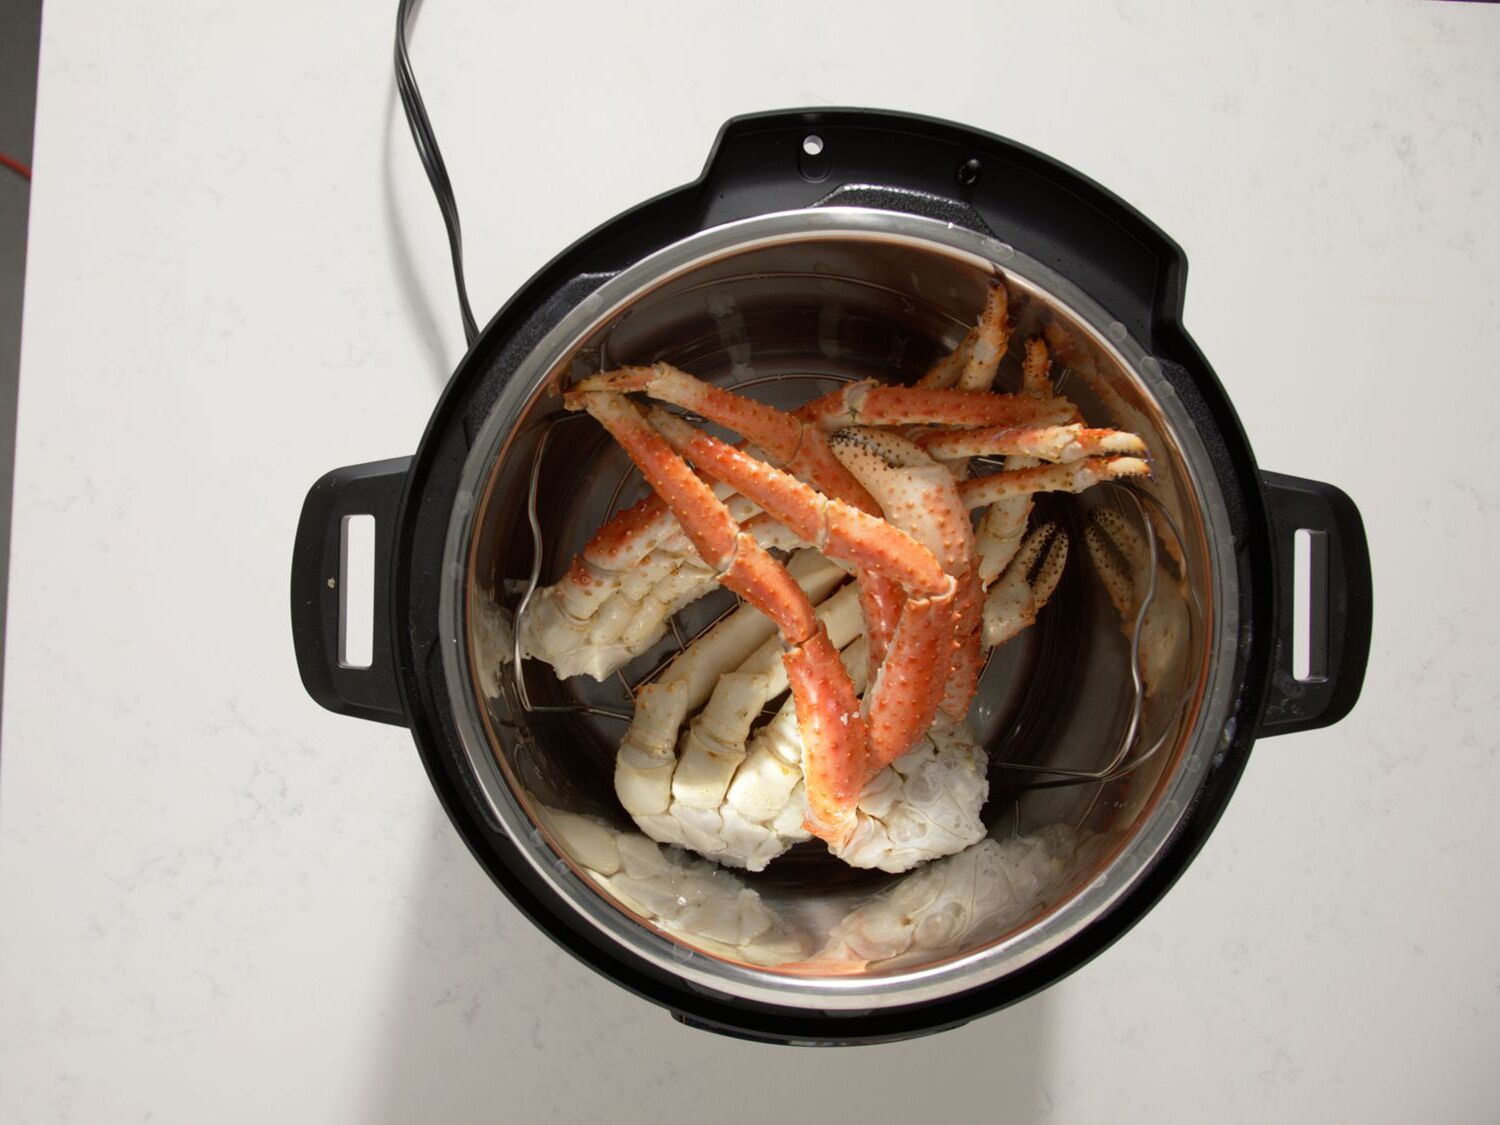 How to Make Crab Legs in the Pressure Cooker